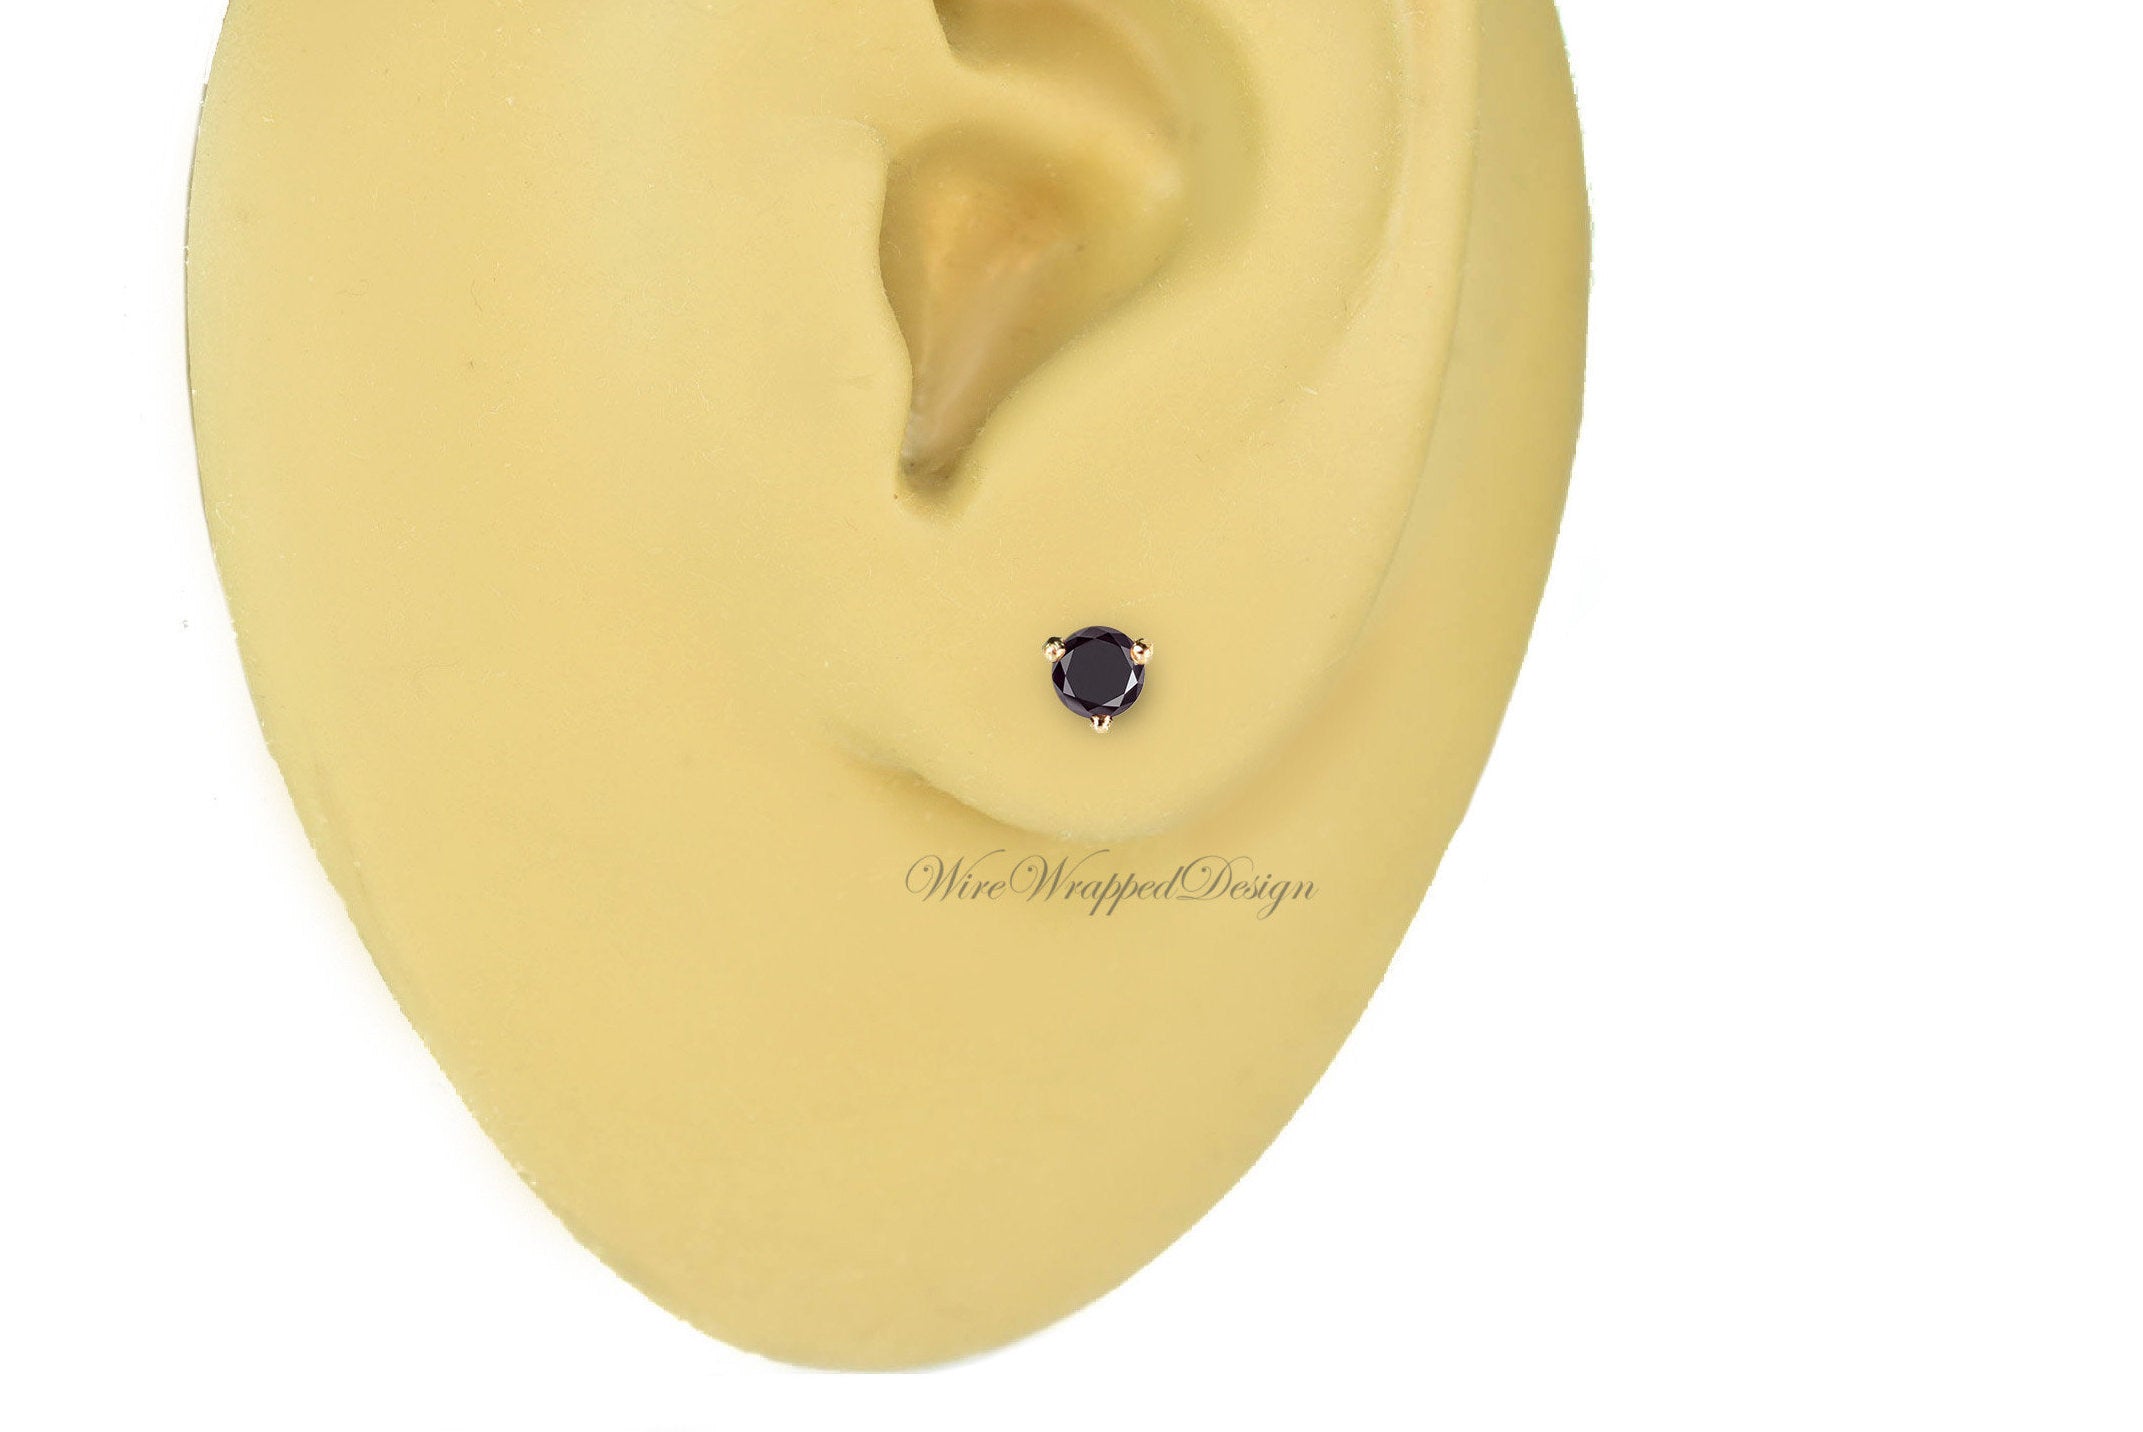 PAIR Genuine BLACK DIAMOND Earrings Studs 3mm 0.24tcw Martini 14k Solid Gold (Yellow, Rose or White) Platinum, Silver Cartilage Helix Tragus